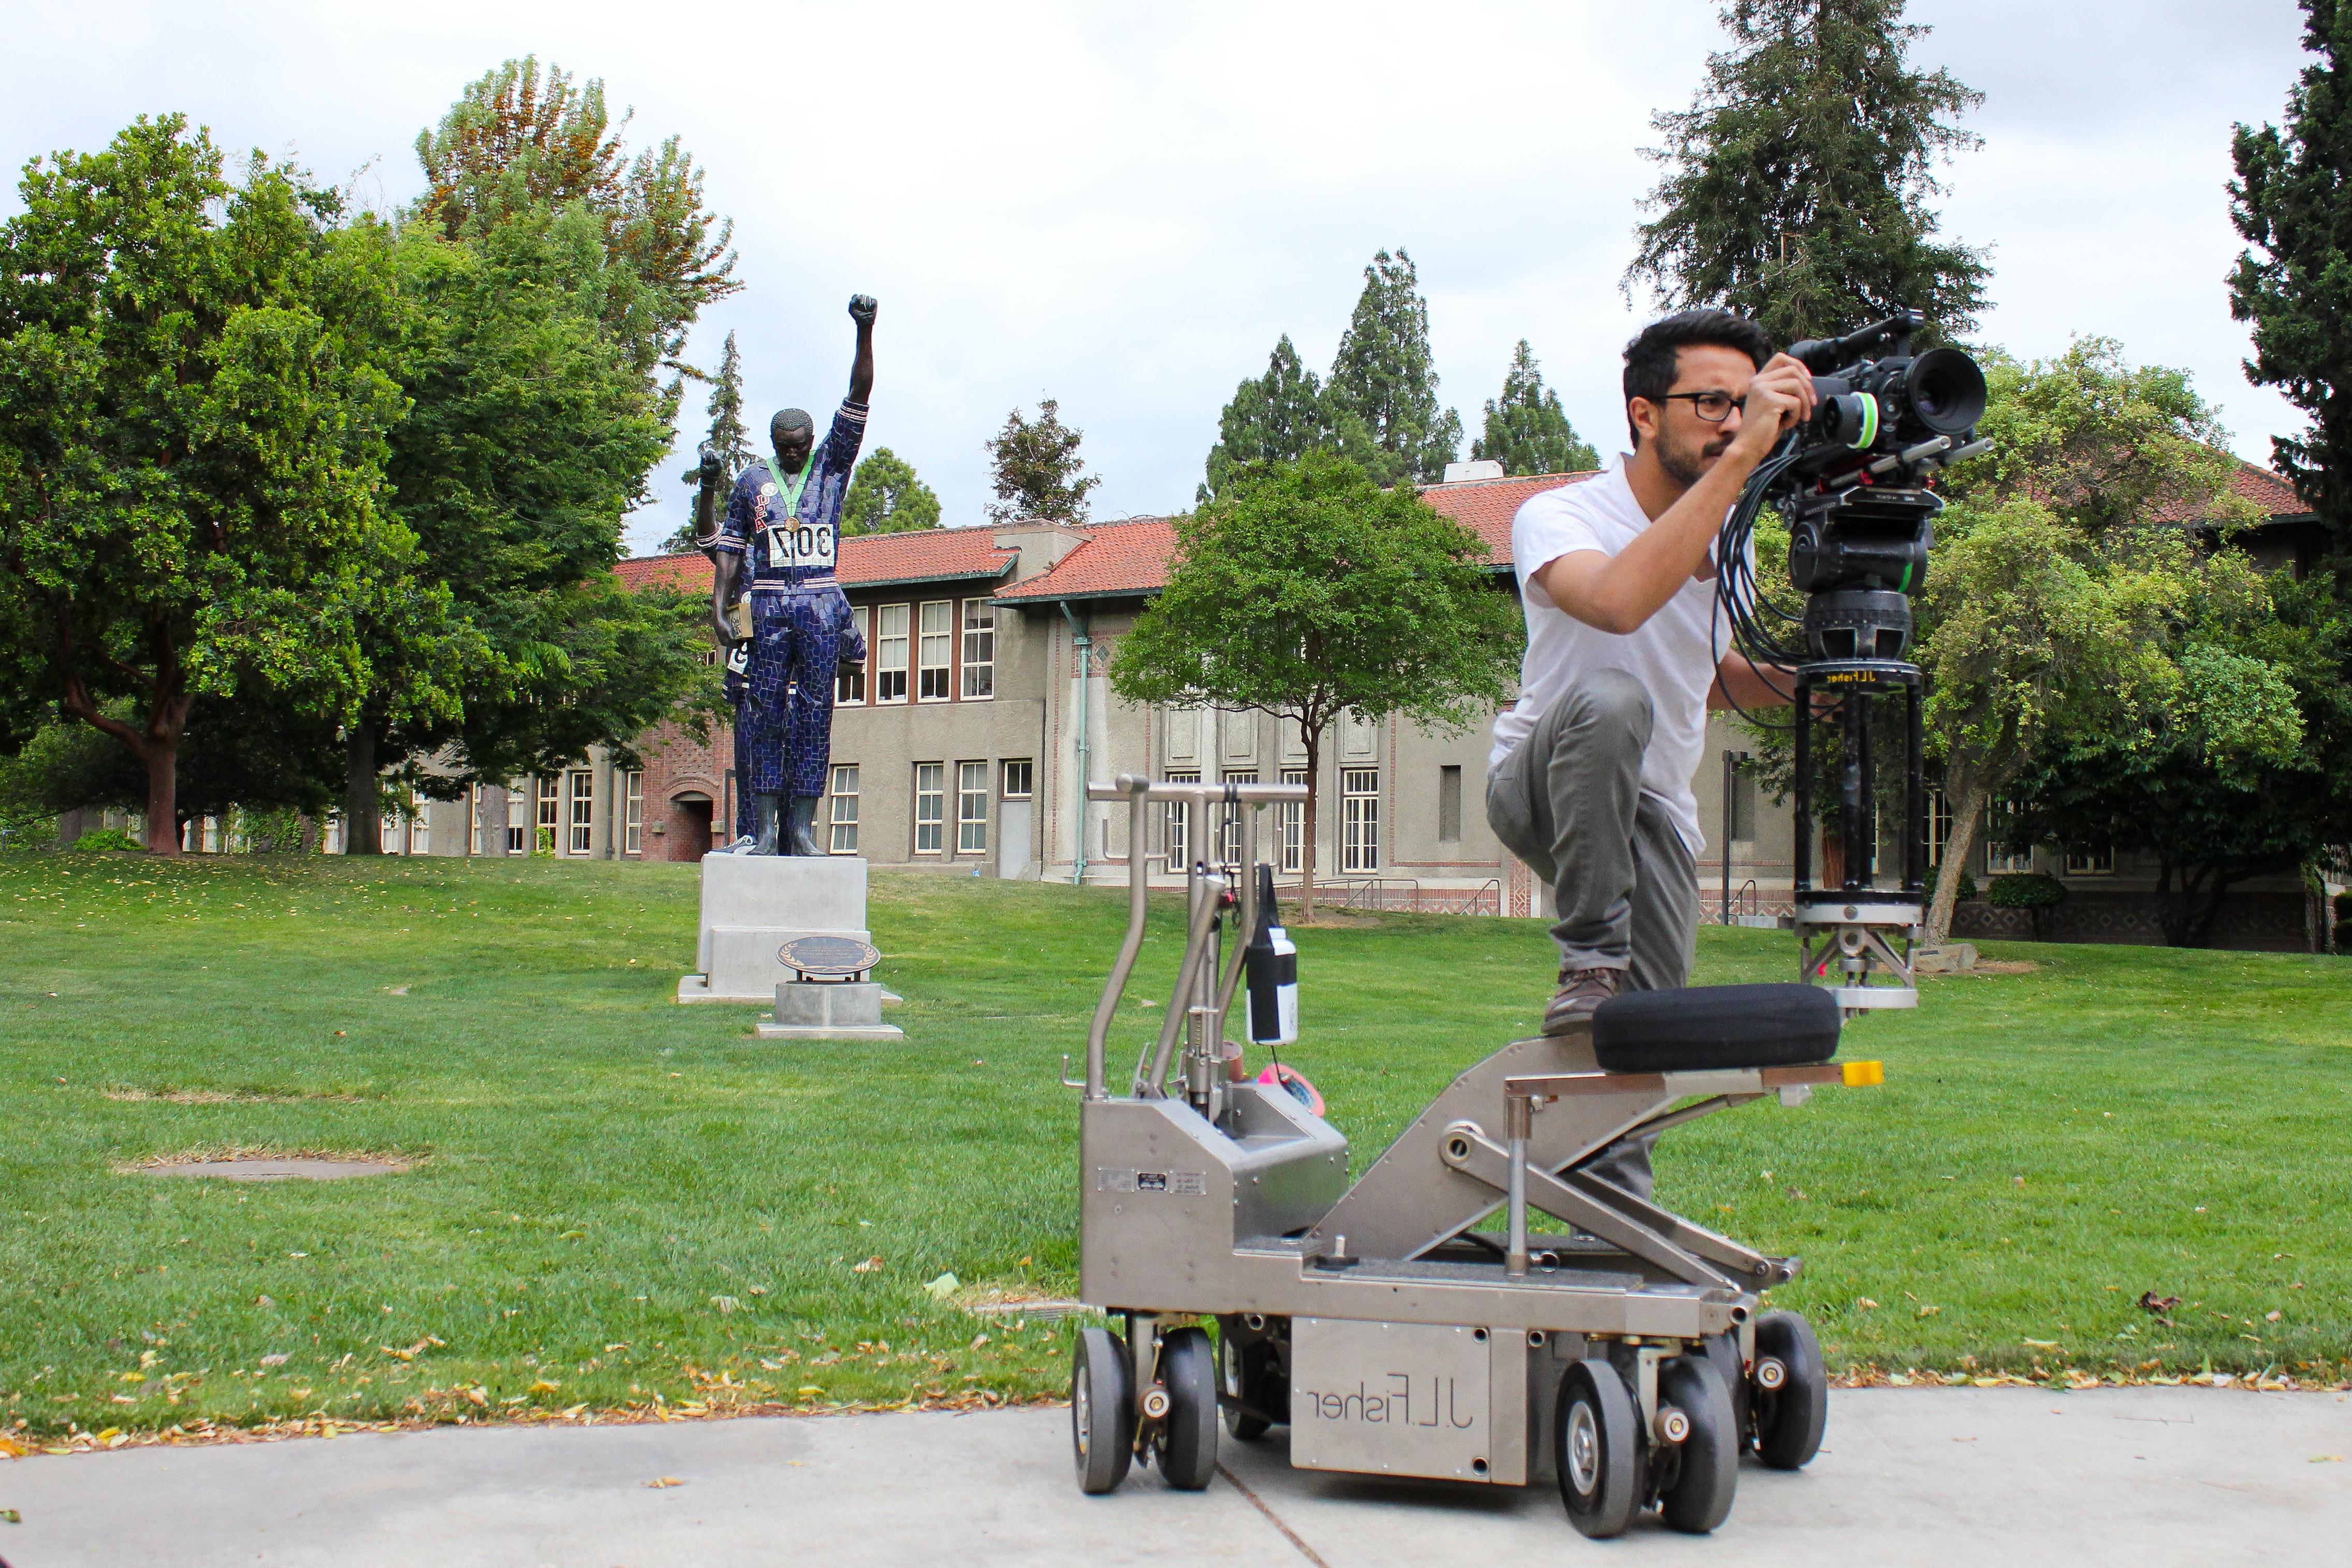 A student stands on a dolly with a camera while filming for a project.